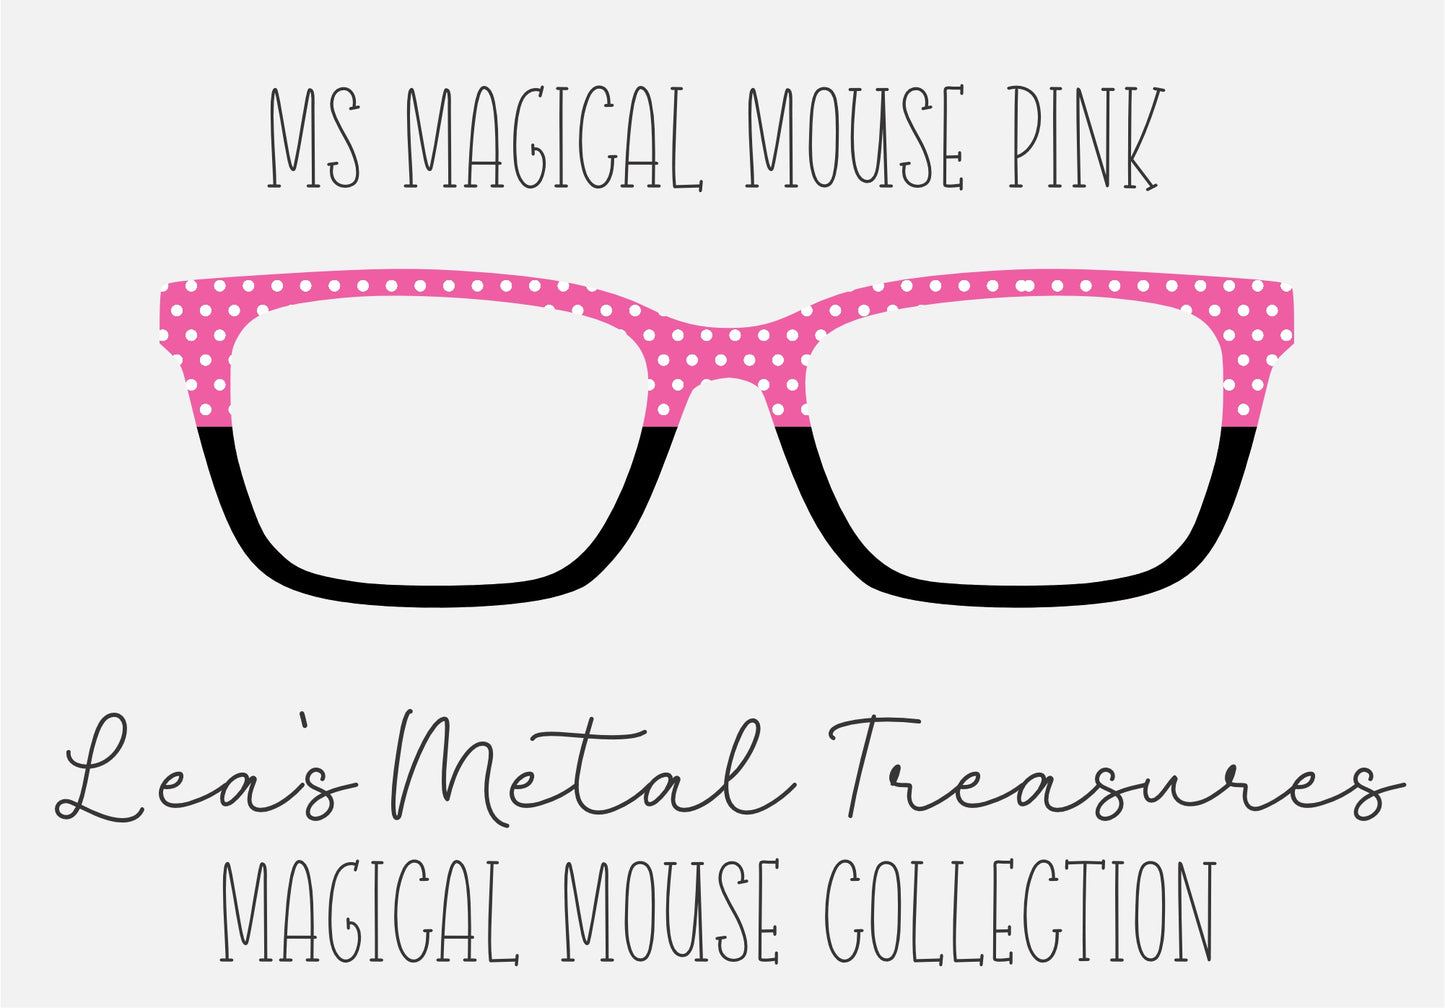 MS MAGICAL MOUSE PINK Eyewear Frame Toppers COMES WITH MAGNETS